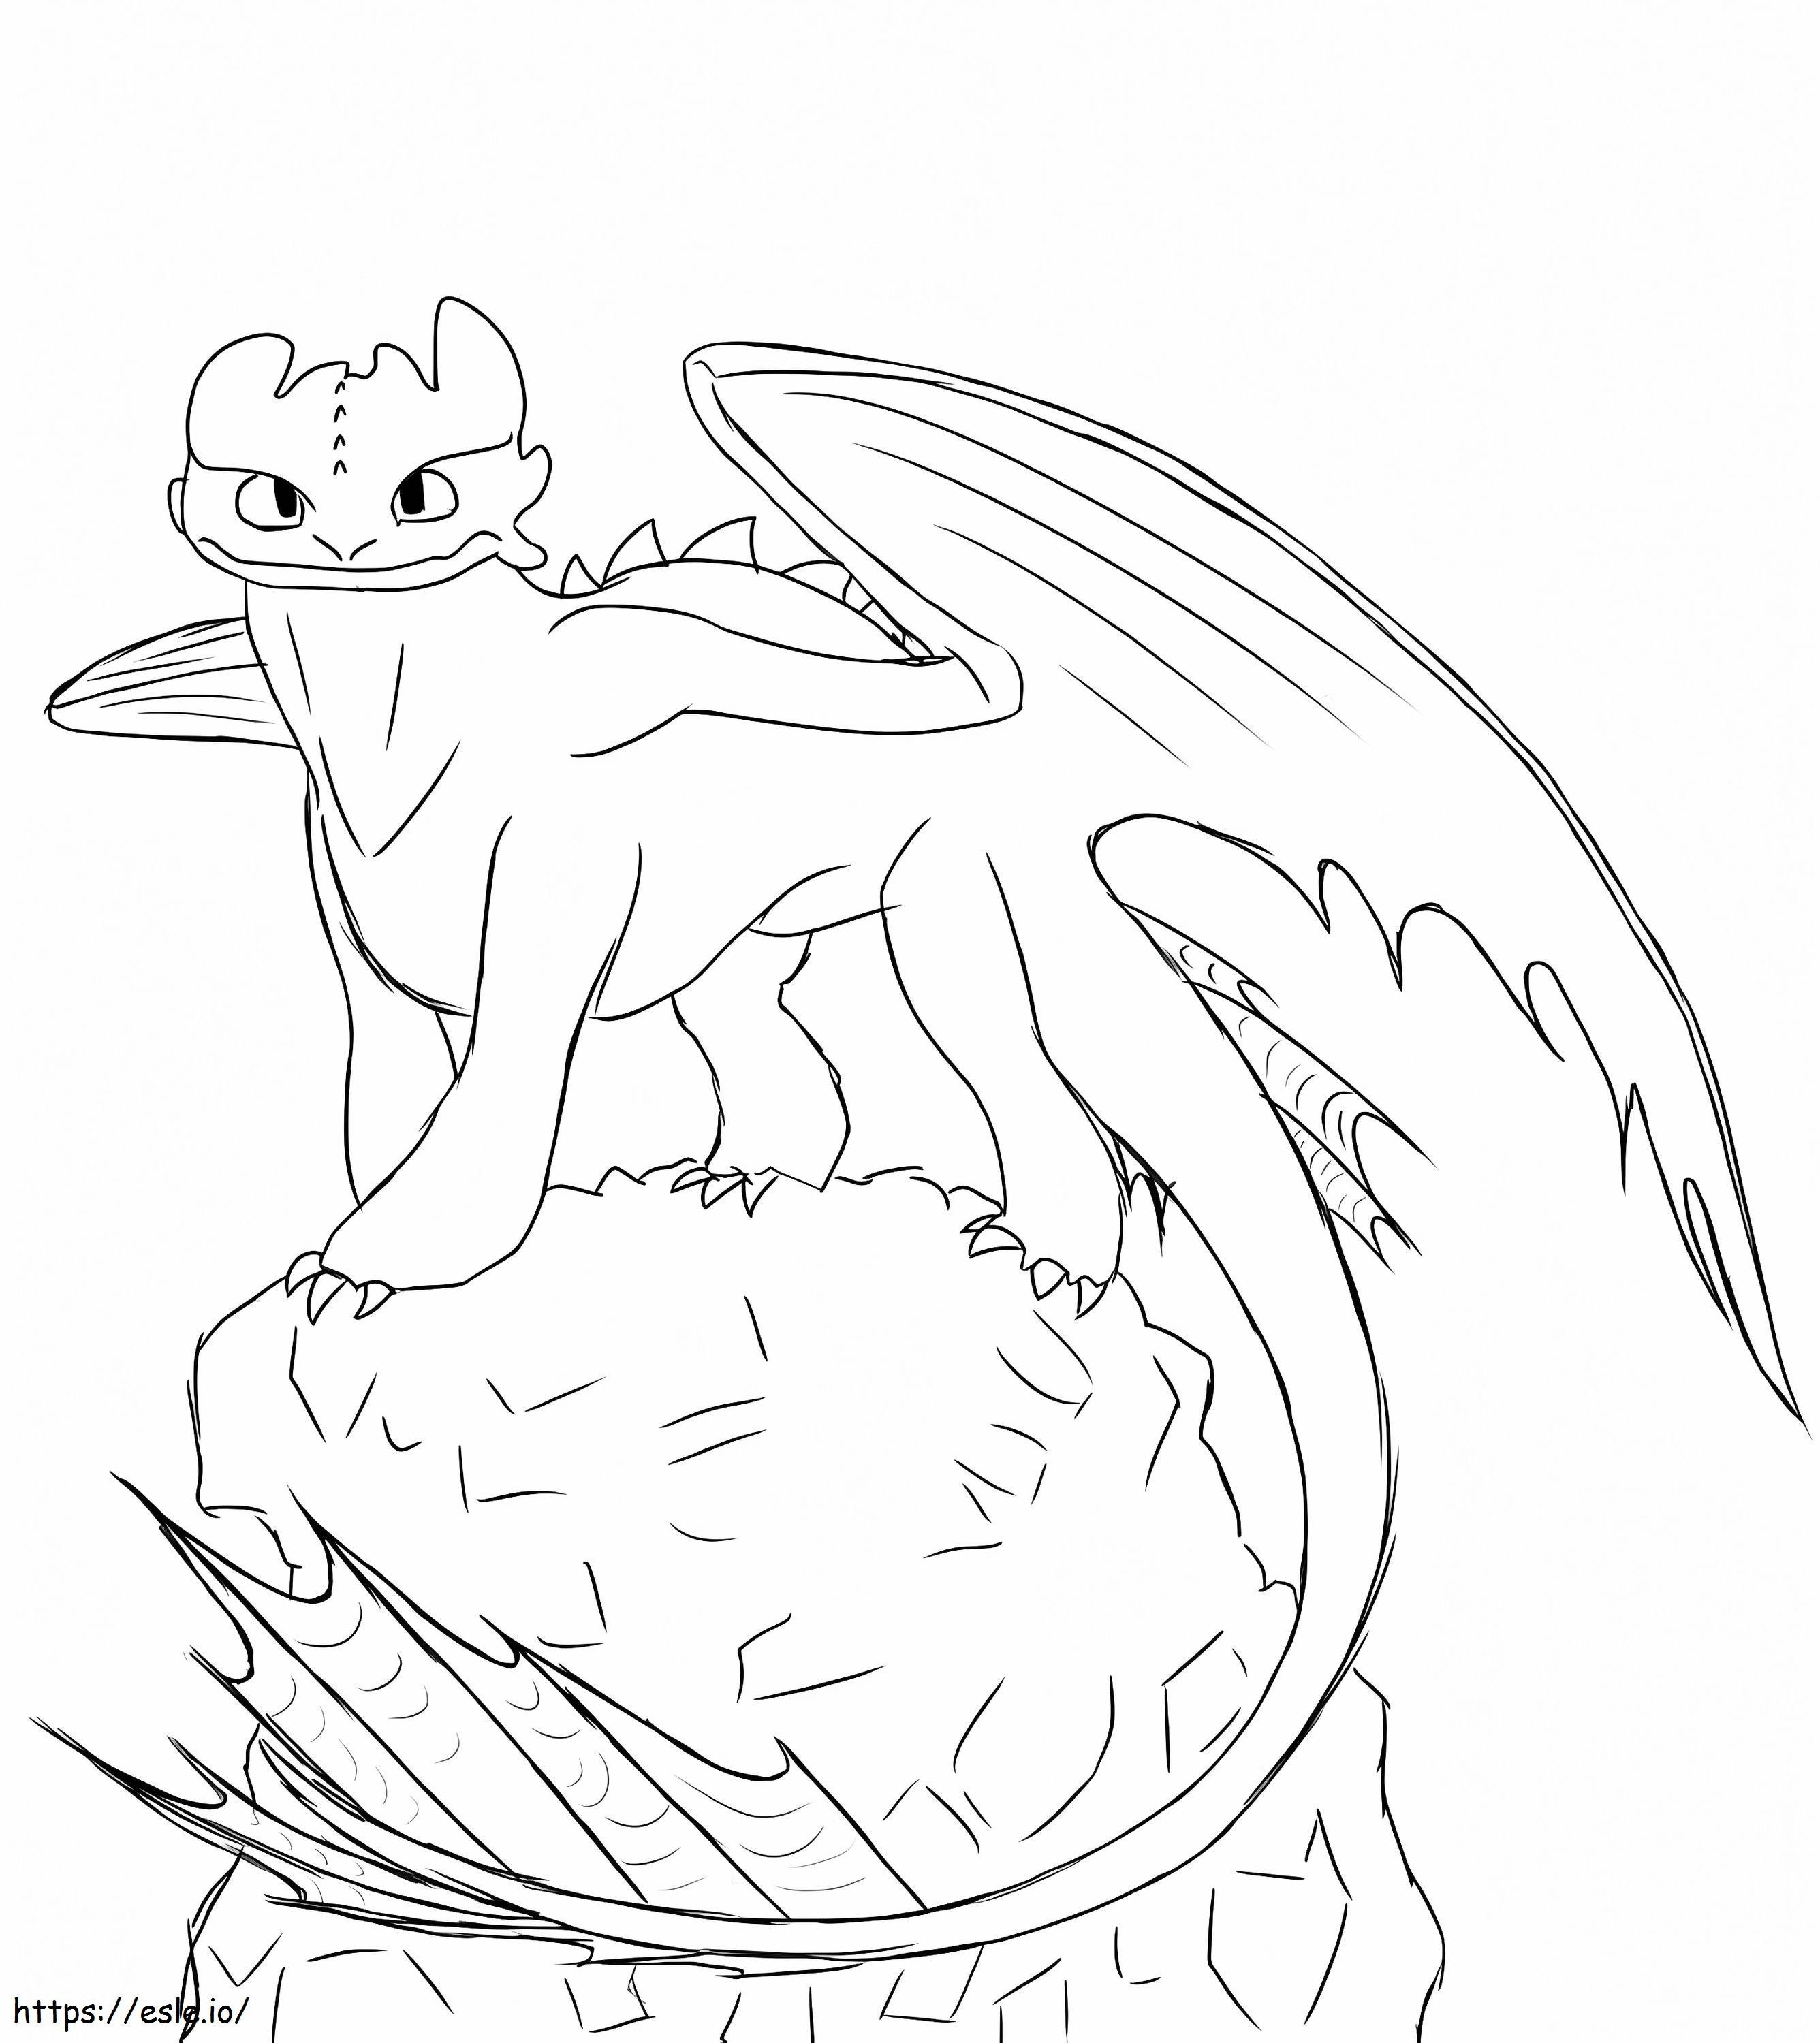 Toothless On A Rock coloring page